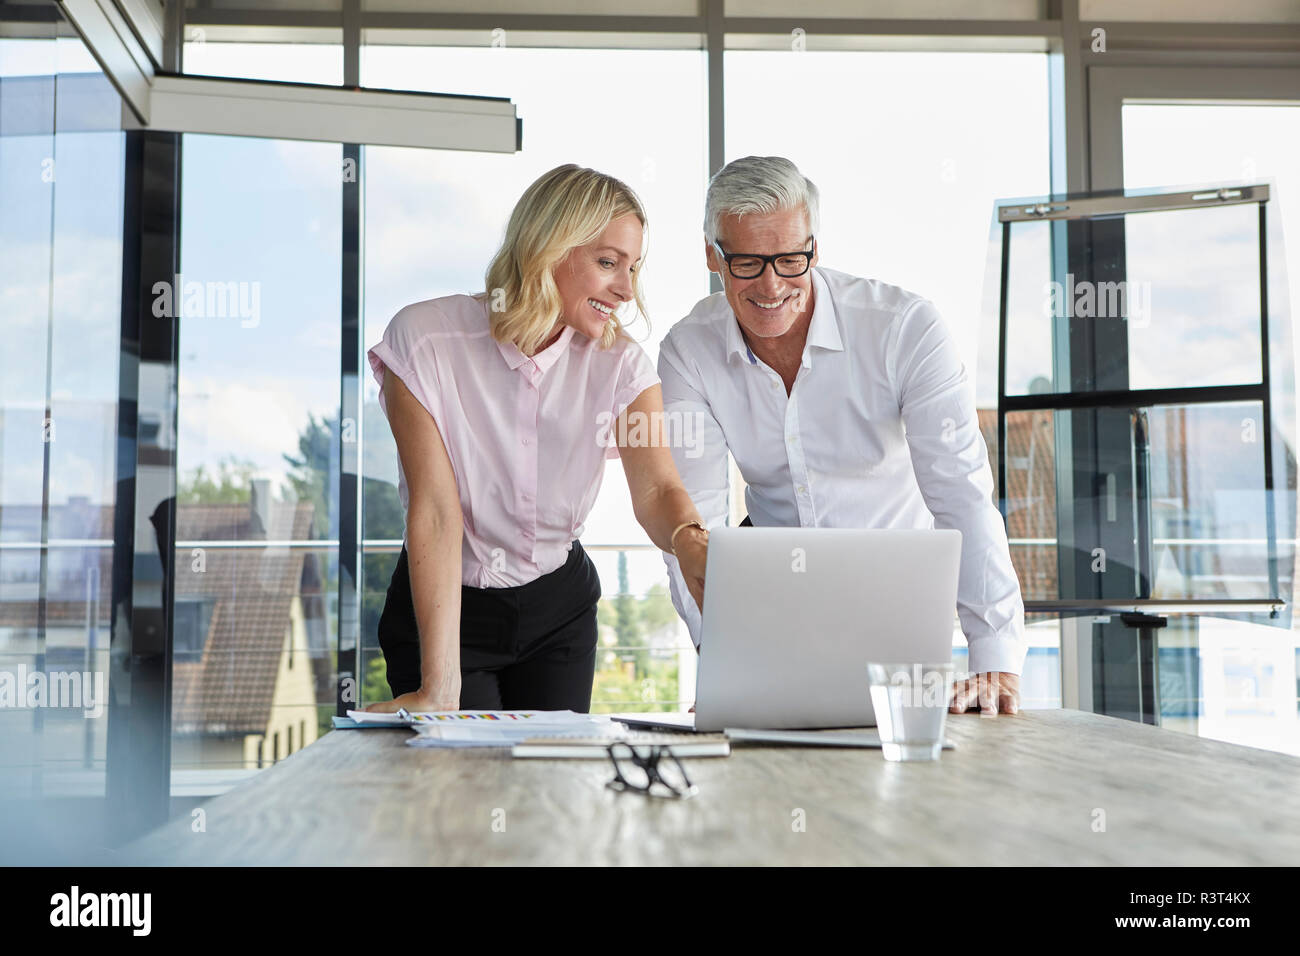 Businessman and woman discussing project in office Stock Photo